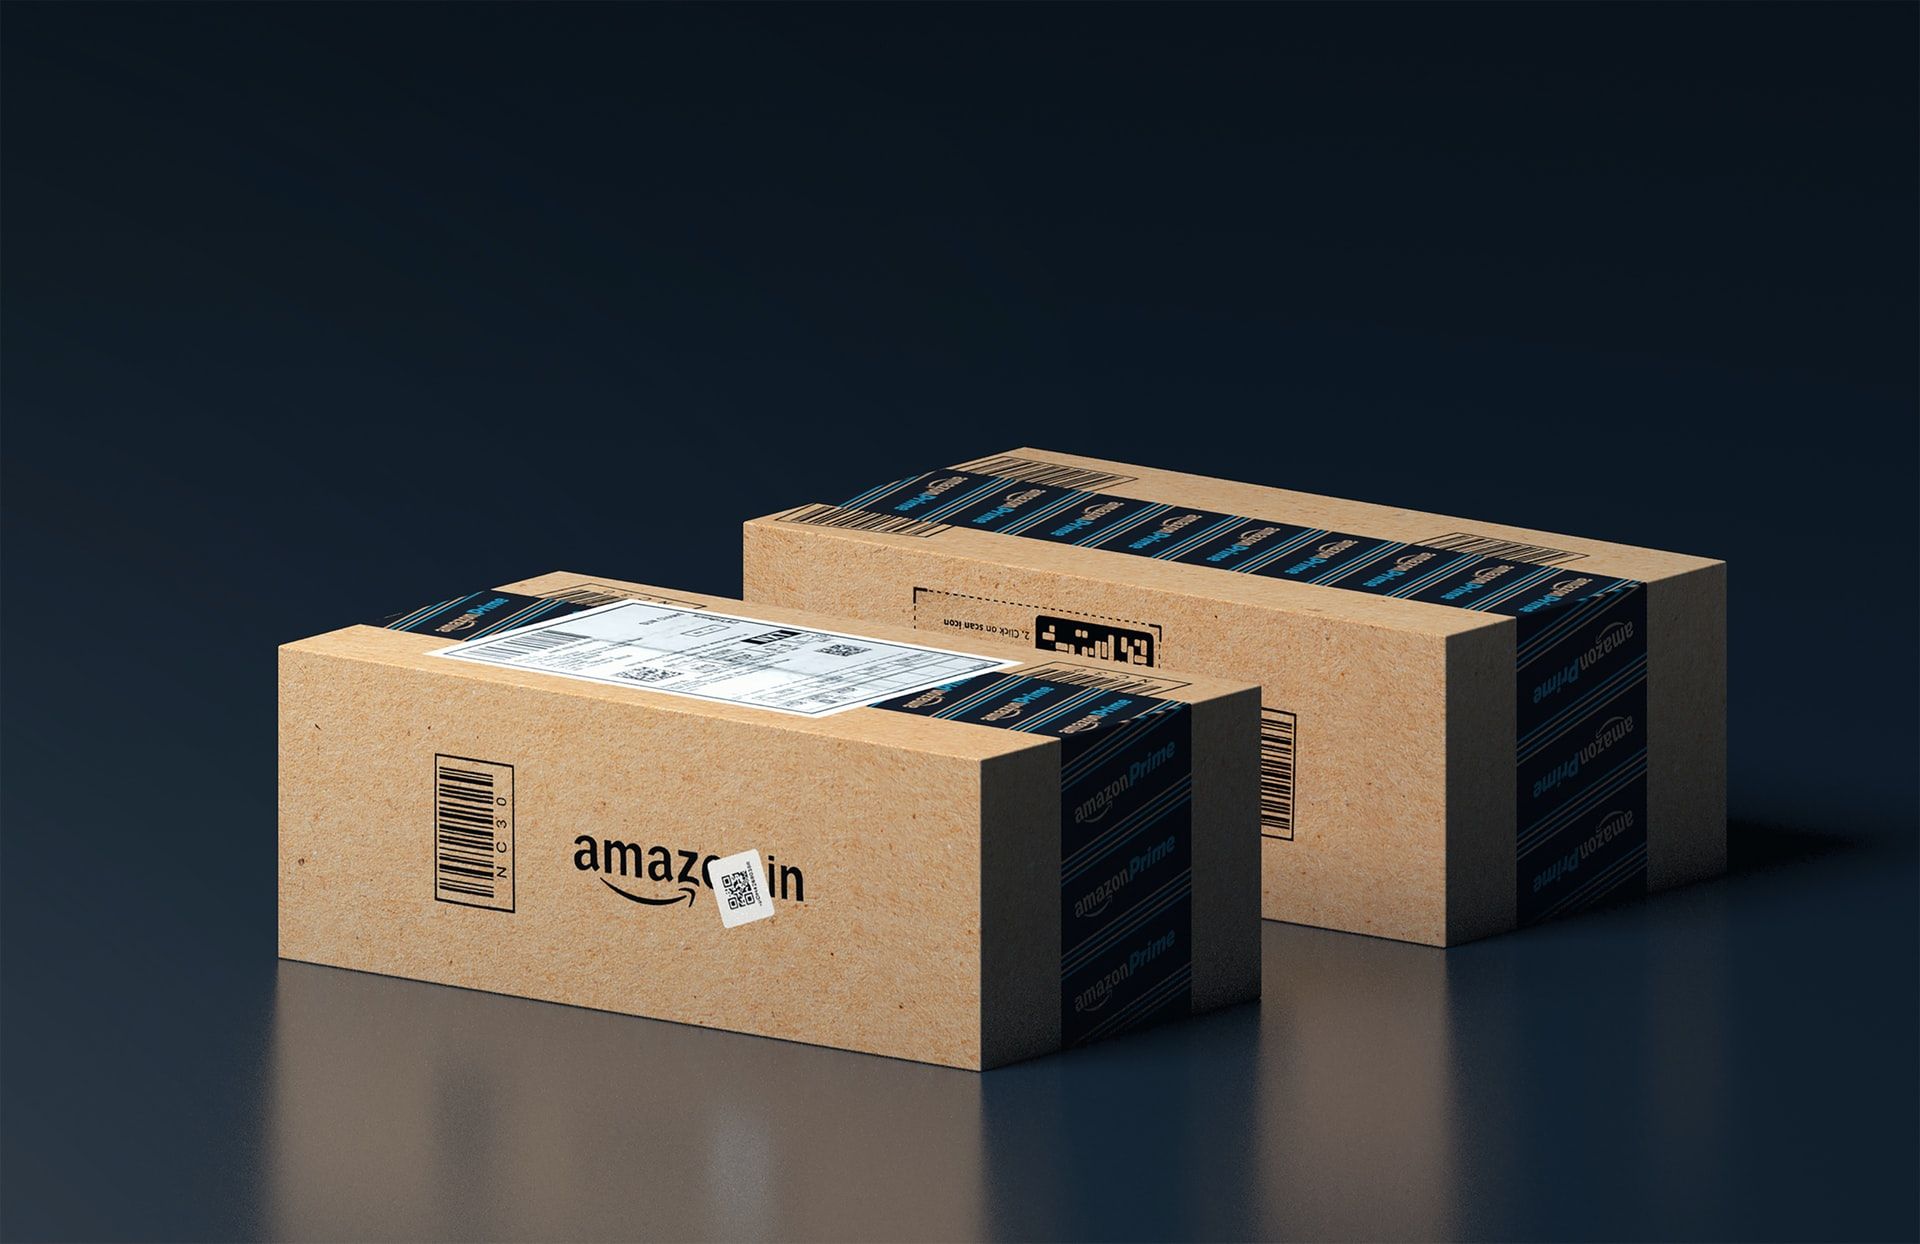 Picture of two Amazon packages